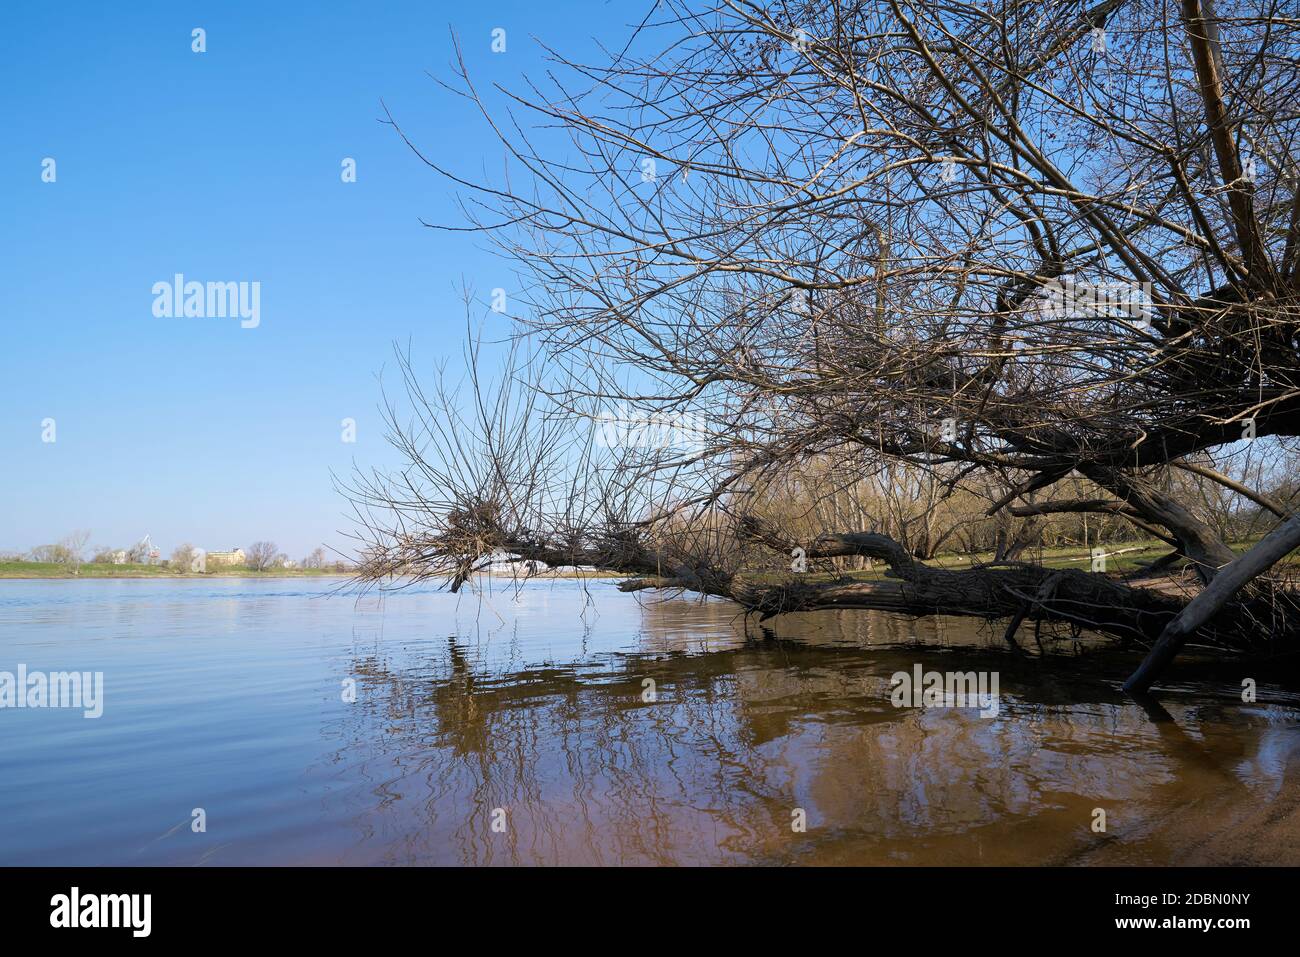 Willow on the banks of the river Elbe at Herrenkrug near Magdeburg in Germany Stock Photo